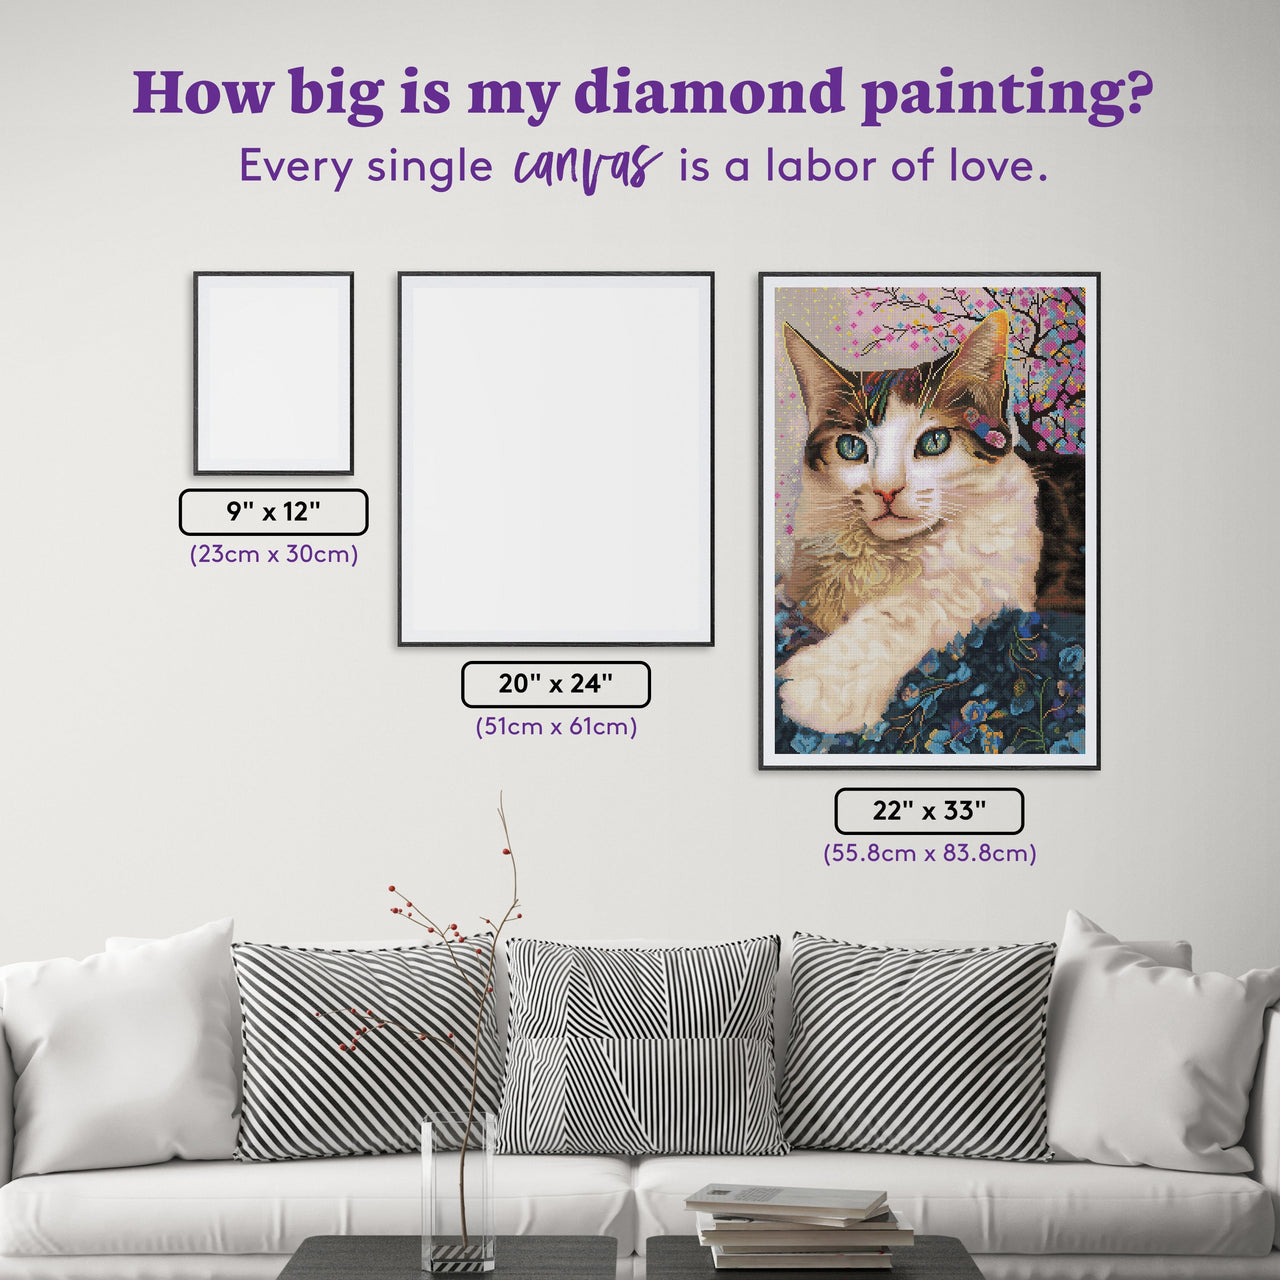 Diamond Painting Gem Under the Sakura 22" x 33" (55.8cm x 83.8cm) / Round with 67 Colors including 3 ABs and 2 Fairy Dust Diamonds / 59,501